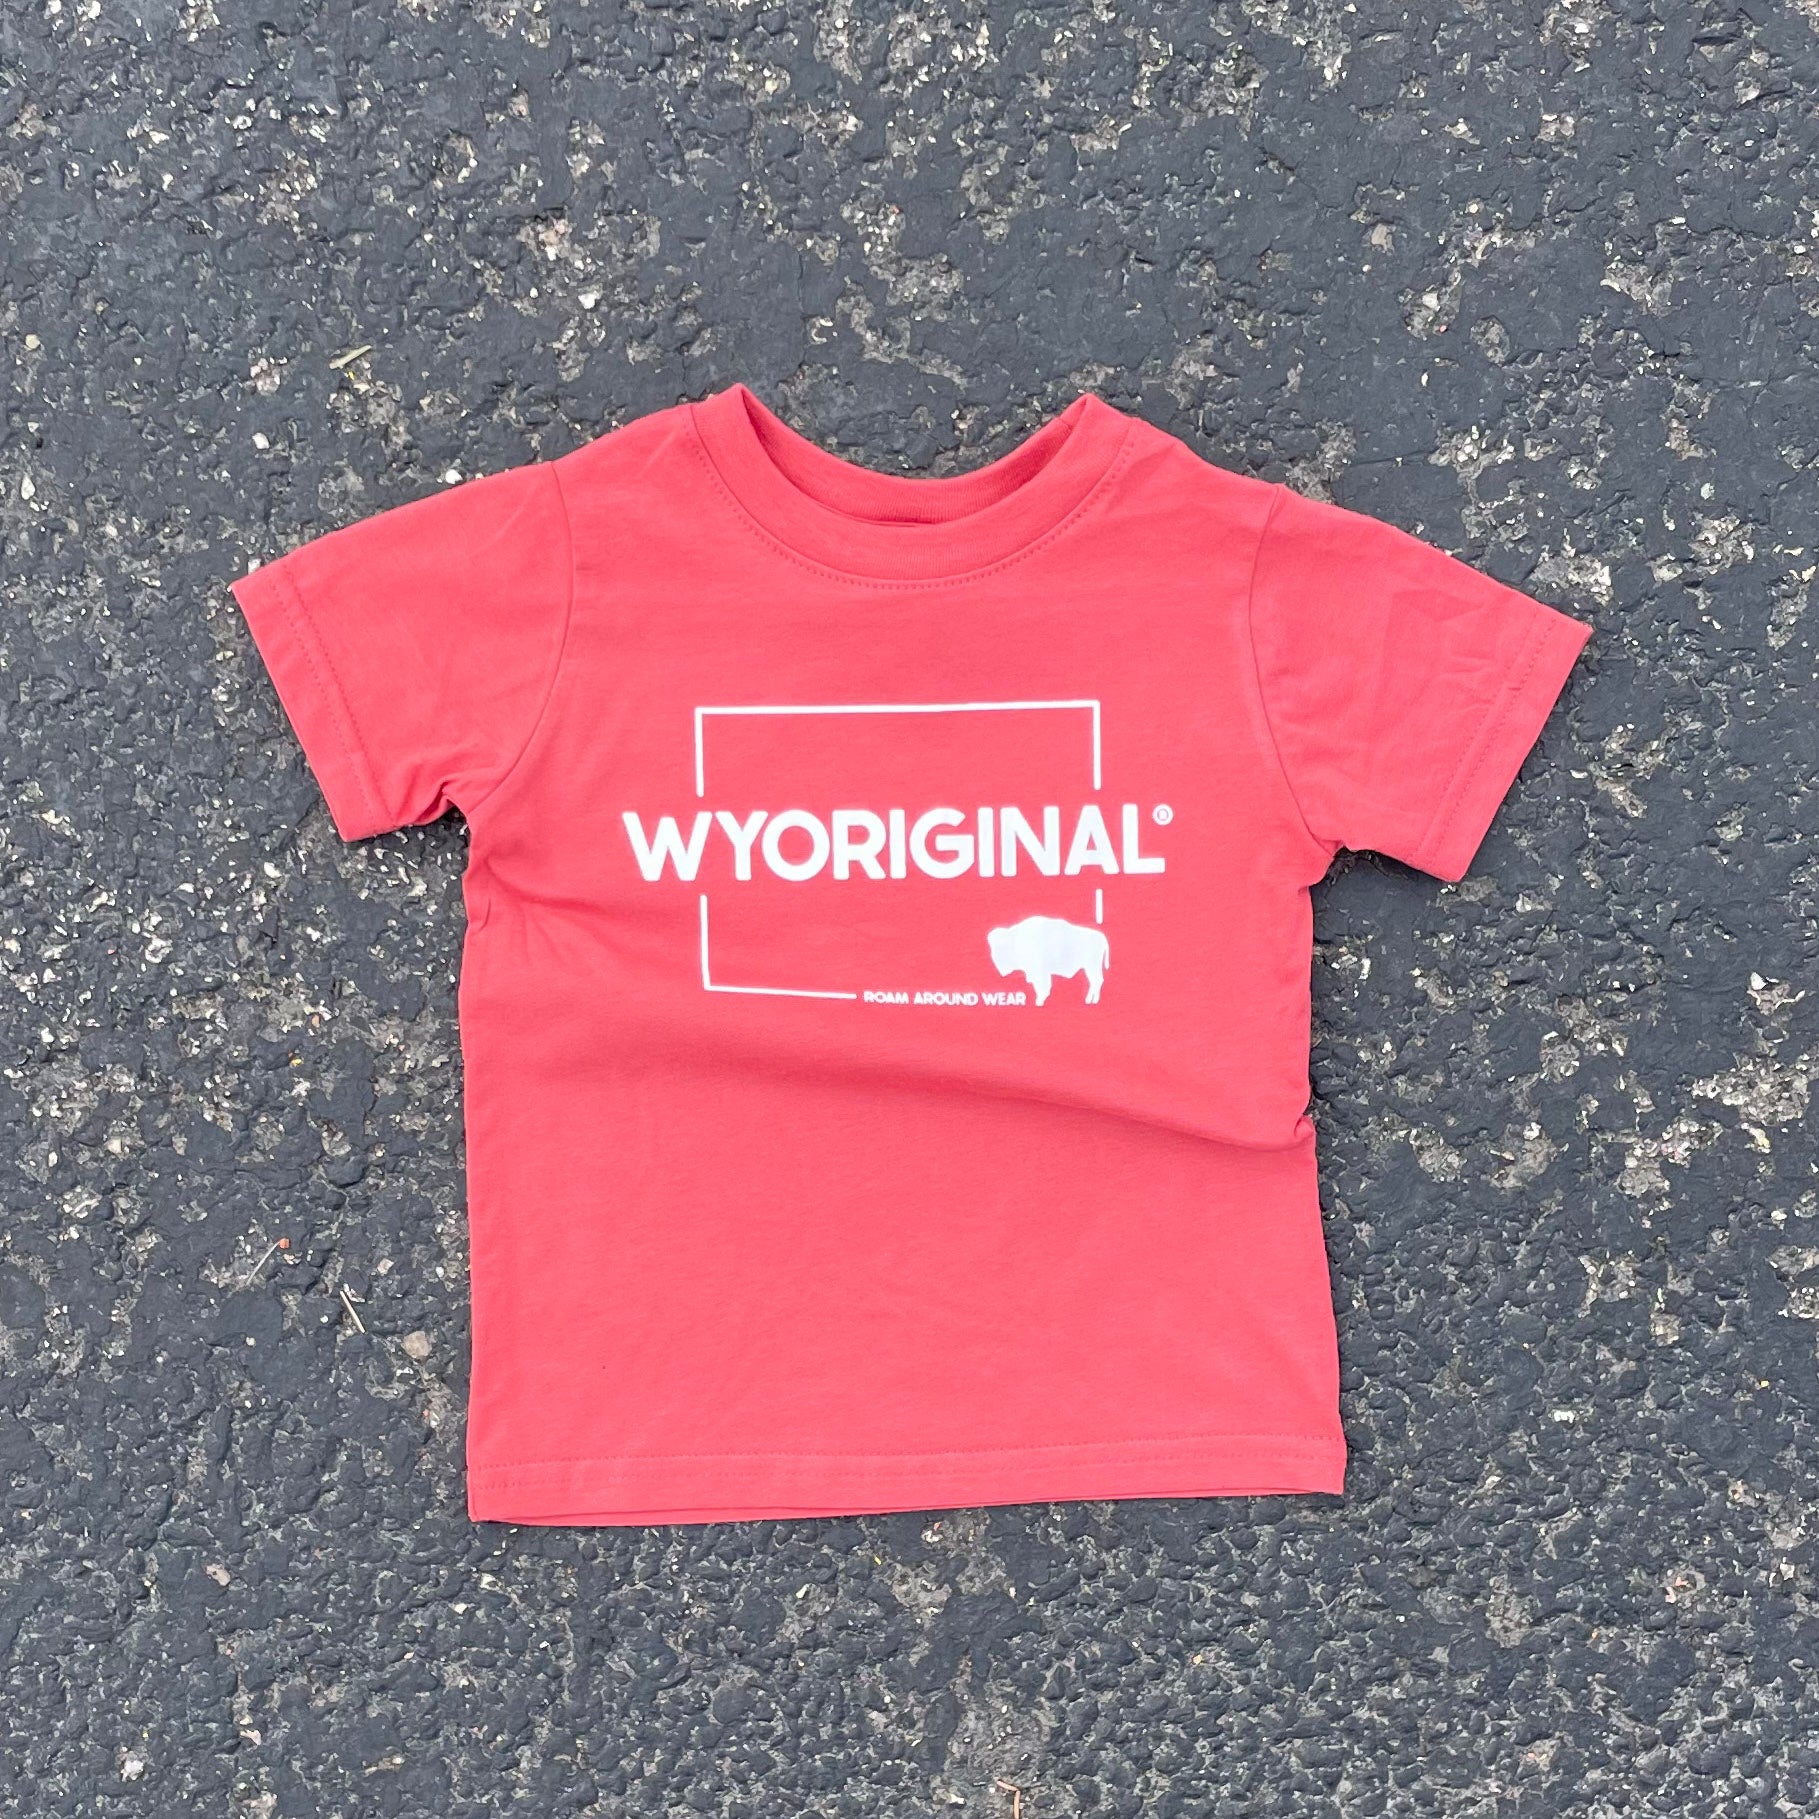 WYORIGINAL® Square State Toddler/Youth T-Shirt | Wear will you roam today? Roam Around Wear is a t-shirt company based in Wyoming